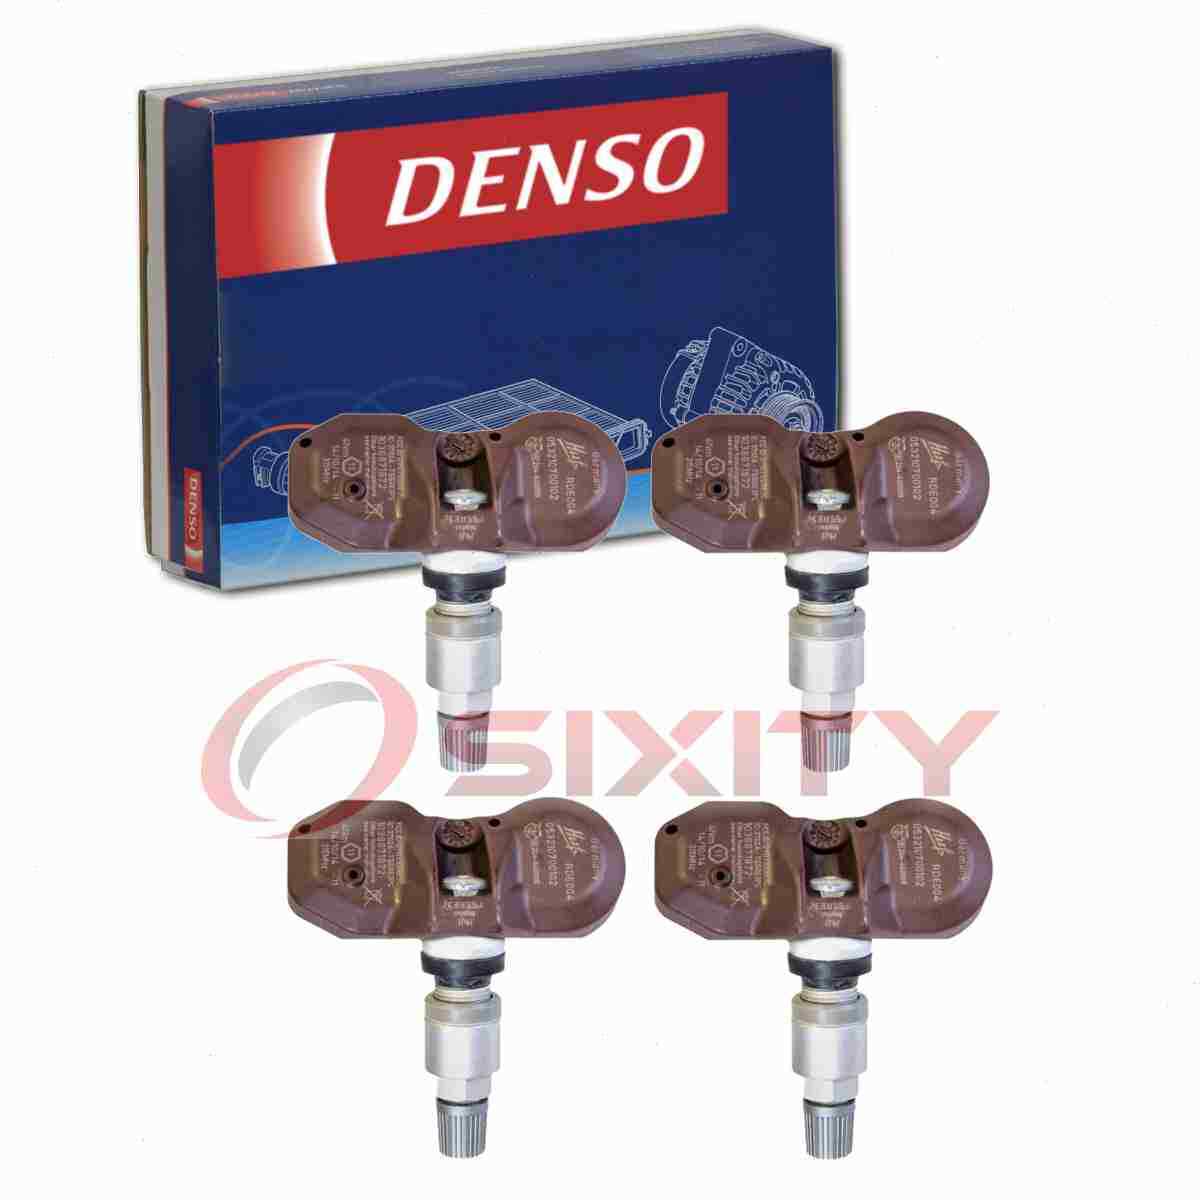 4 pc Denso Tire Pressure Monitoring System Sensors for 2000 BMW 323Ci Wheel  gd